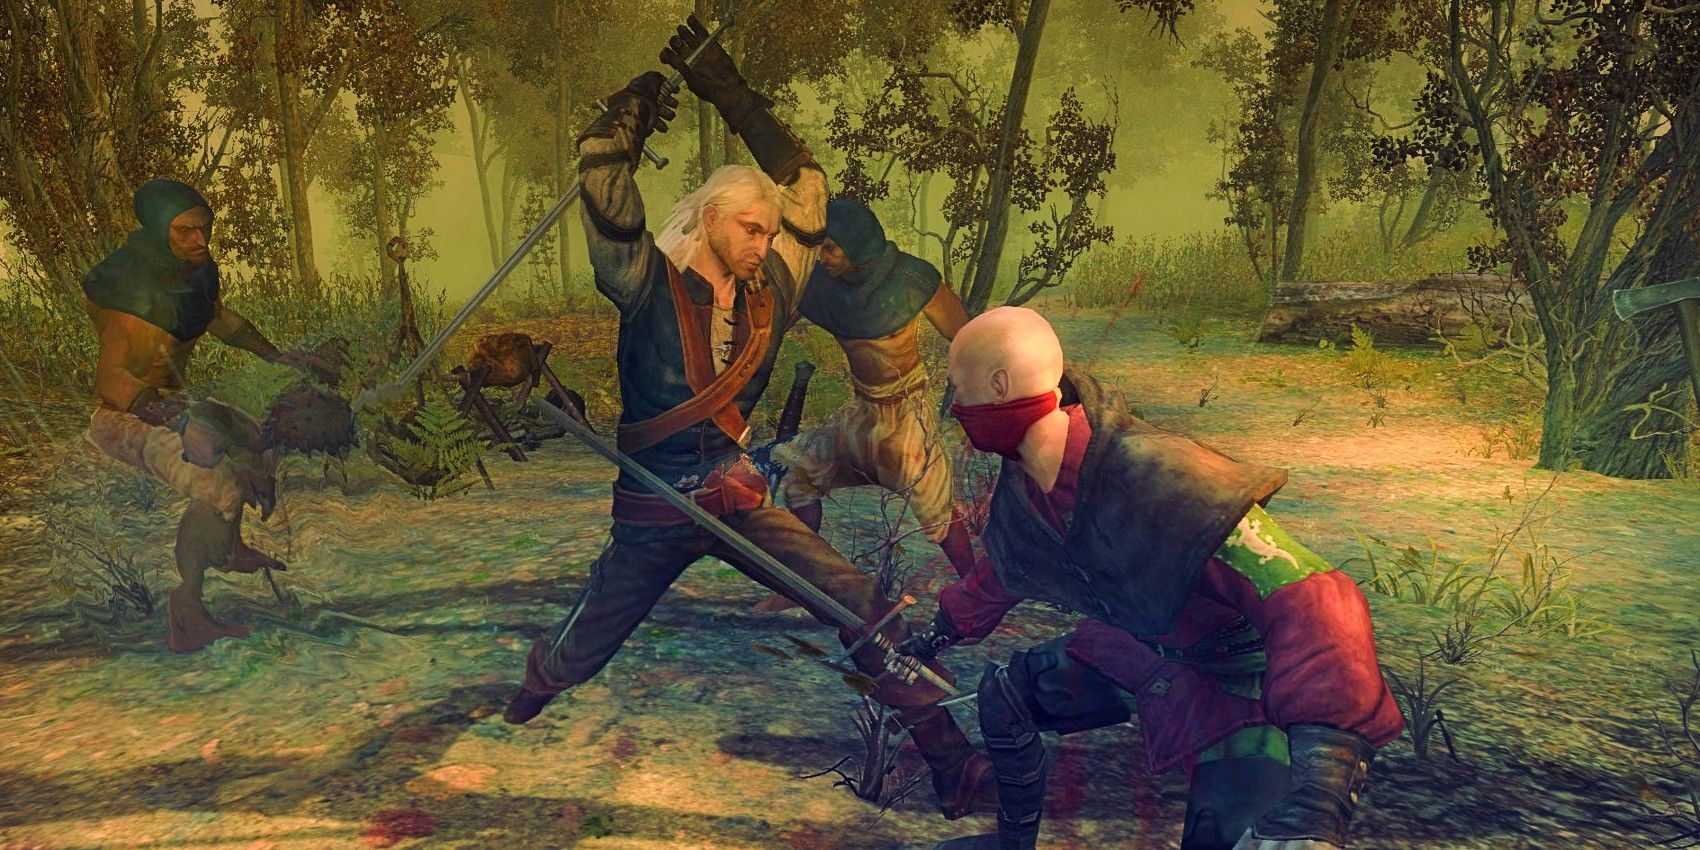 Screenshot depicting a combat sequence in The Witcher, featuring Geralt and a human adversary.